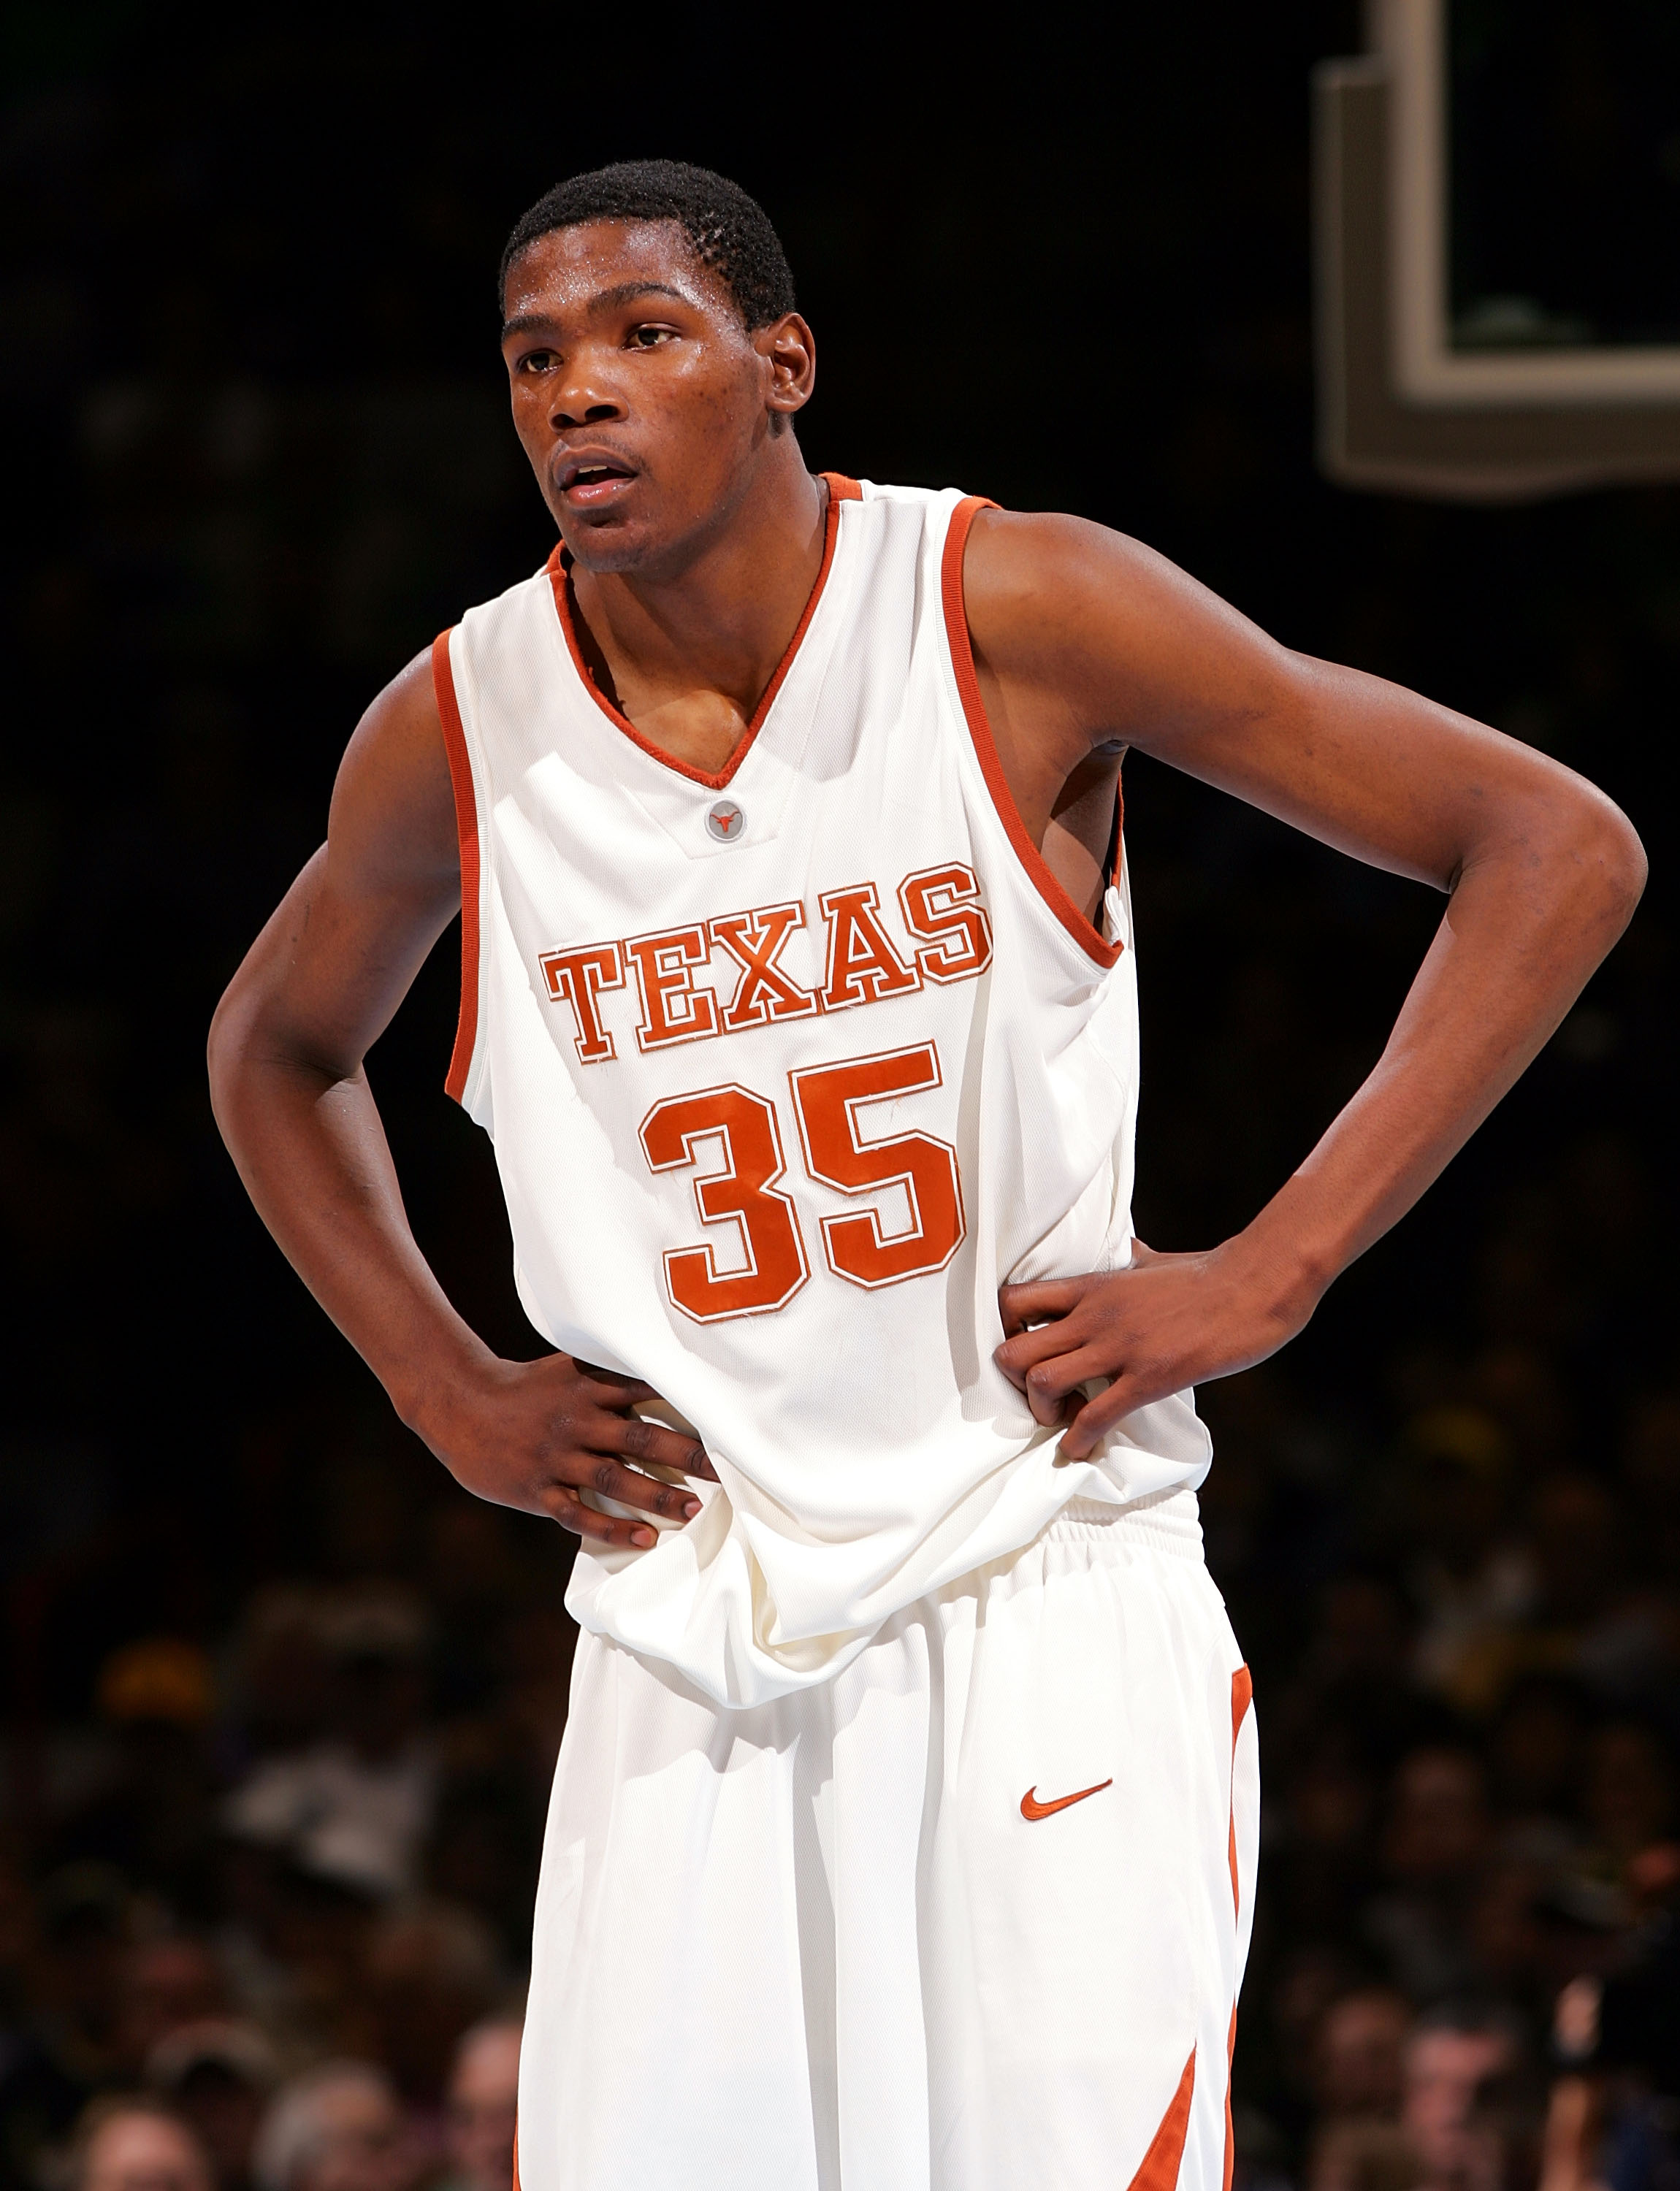 kevin durant texas longhorns jersey